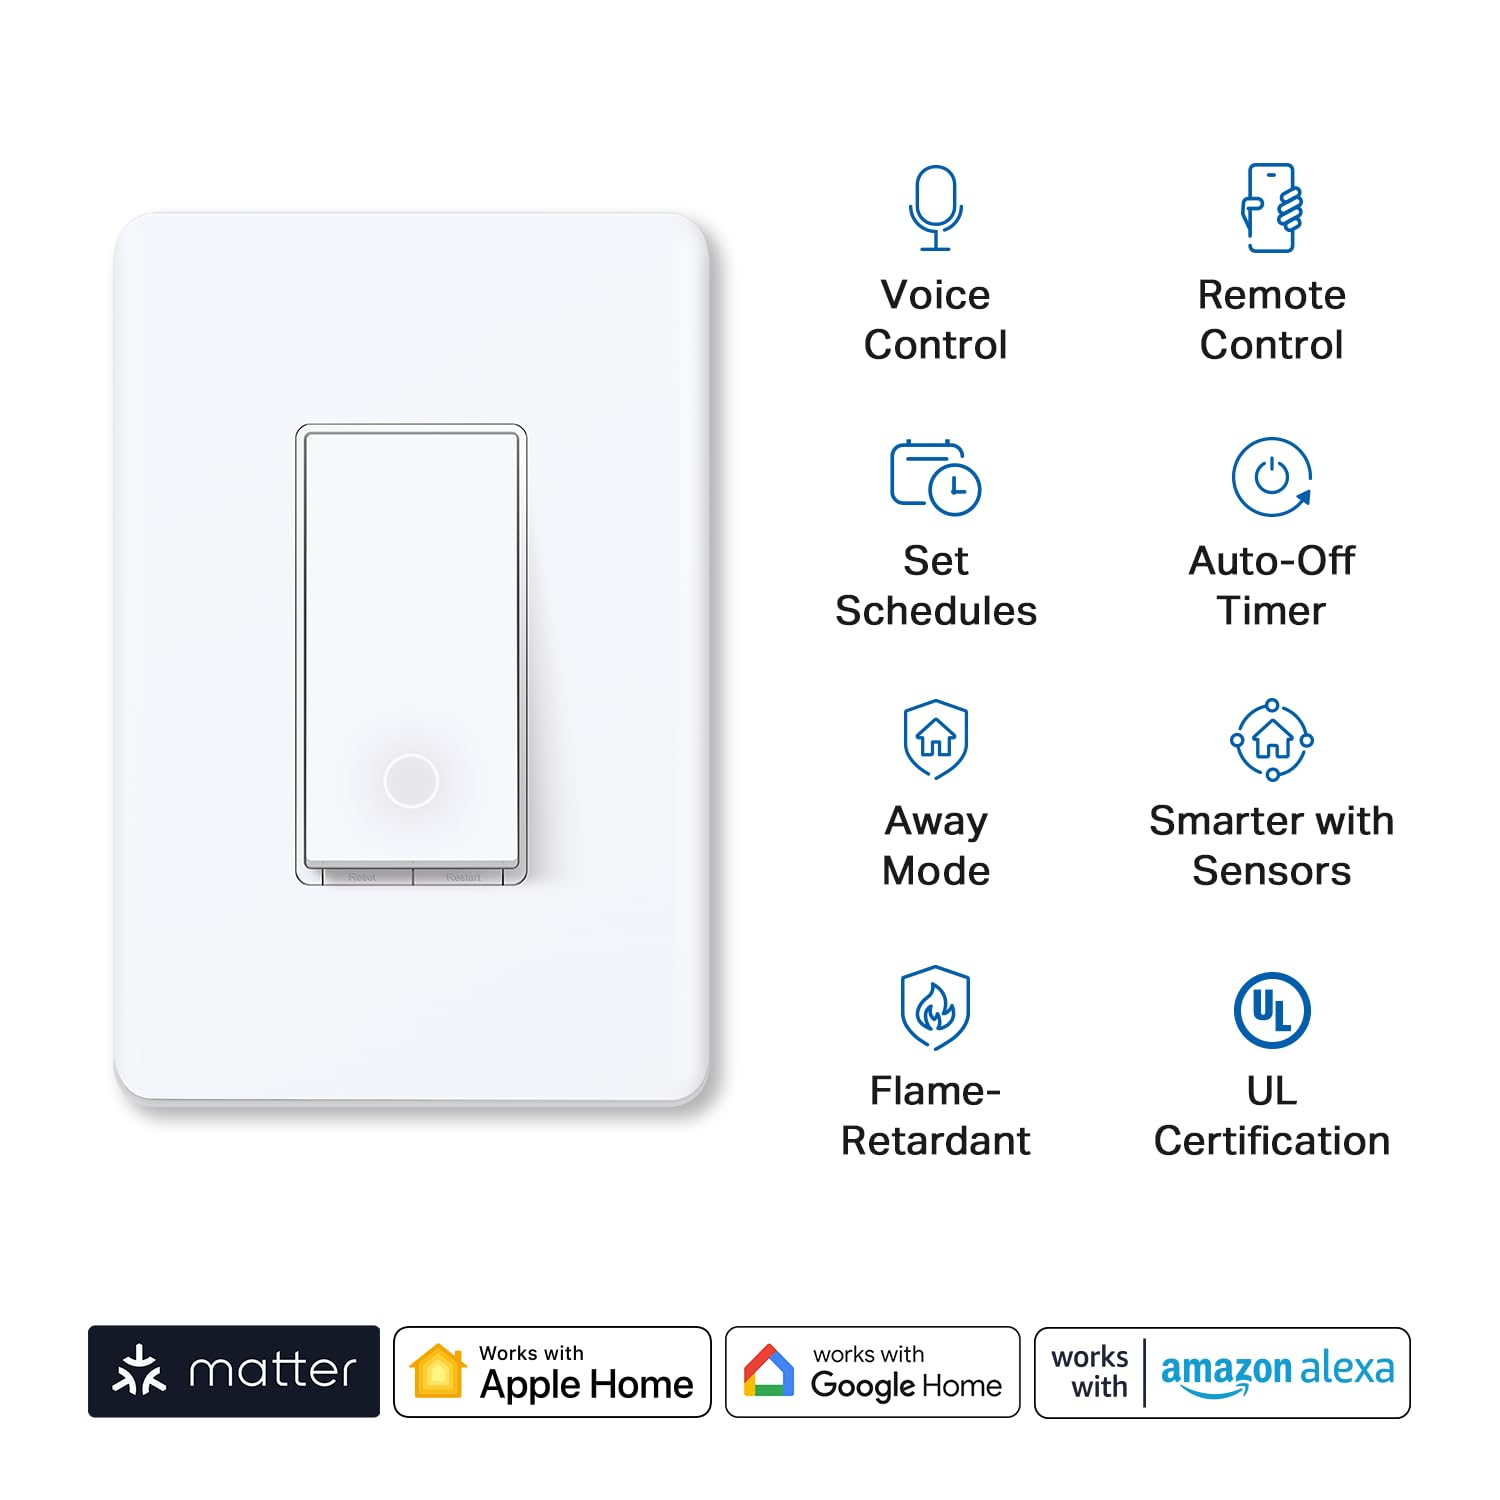 Smart Light Switches